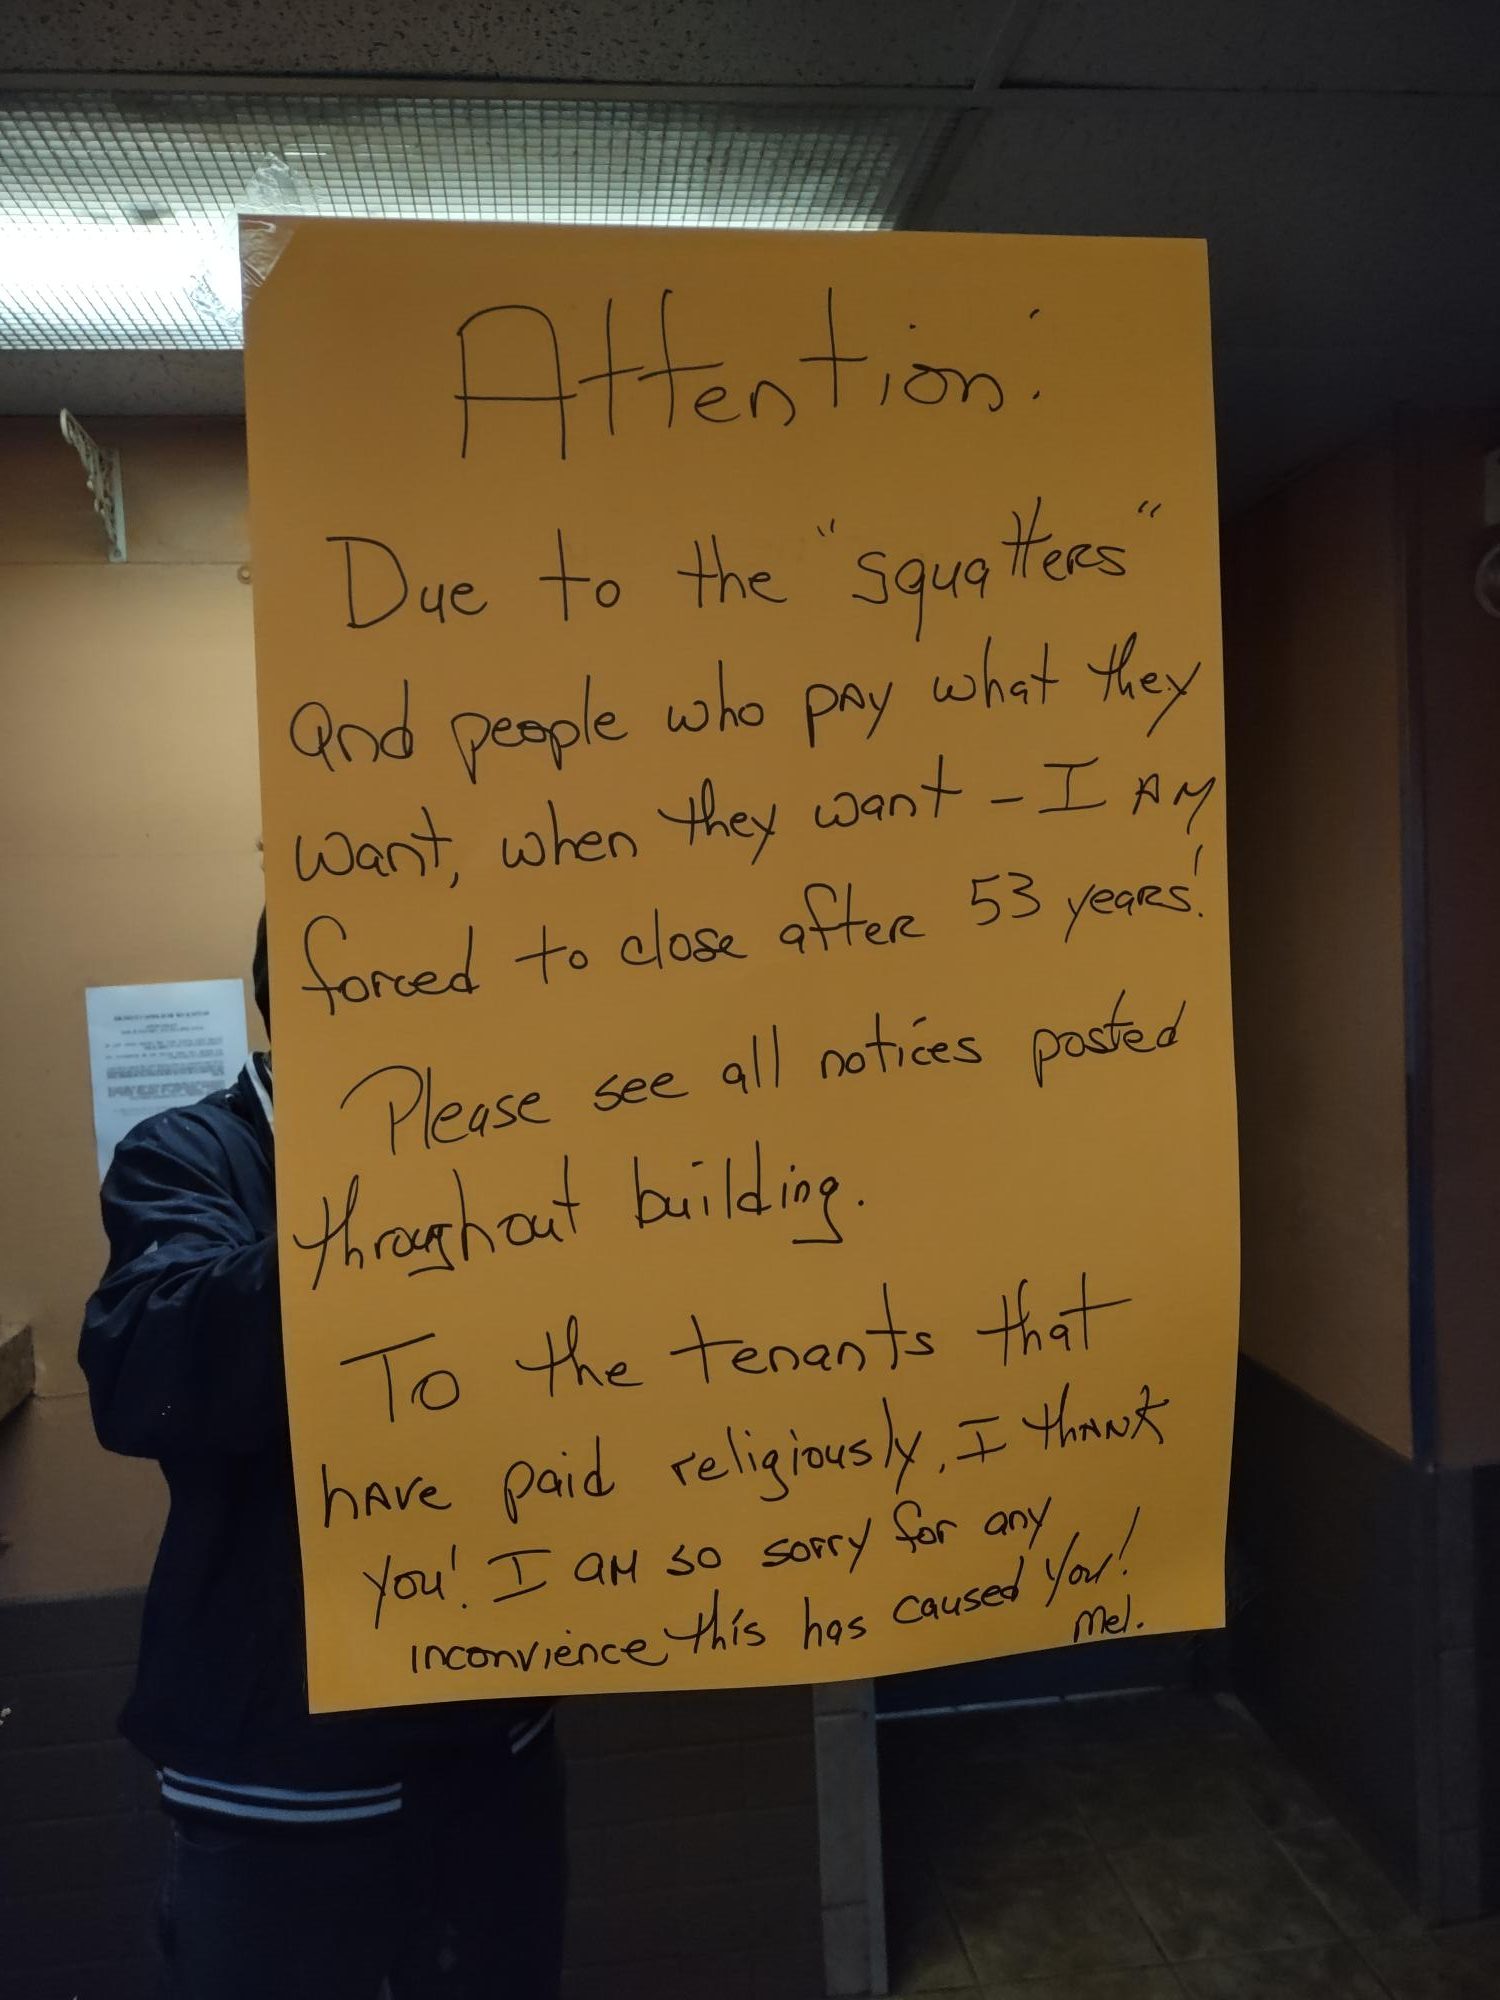 The CCH team worked together with 13 Tenants to protect their rights to stay in the Single Room Occupancy building, Hotel Toledo, after owner sprung an eviction notice with no warning. 